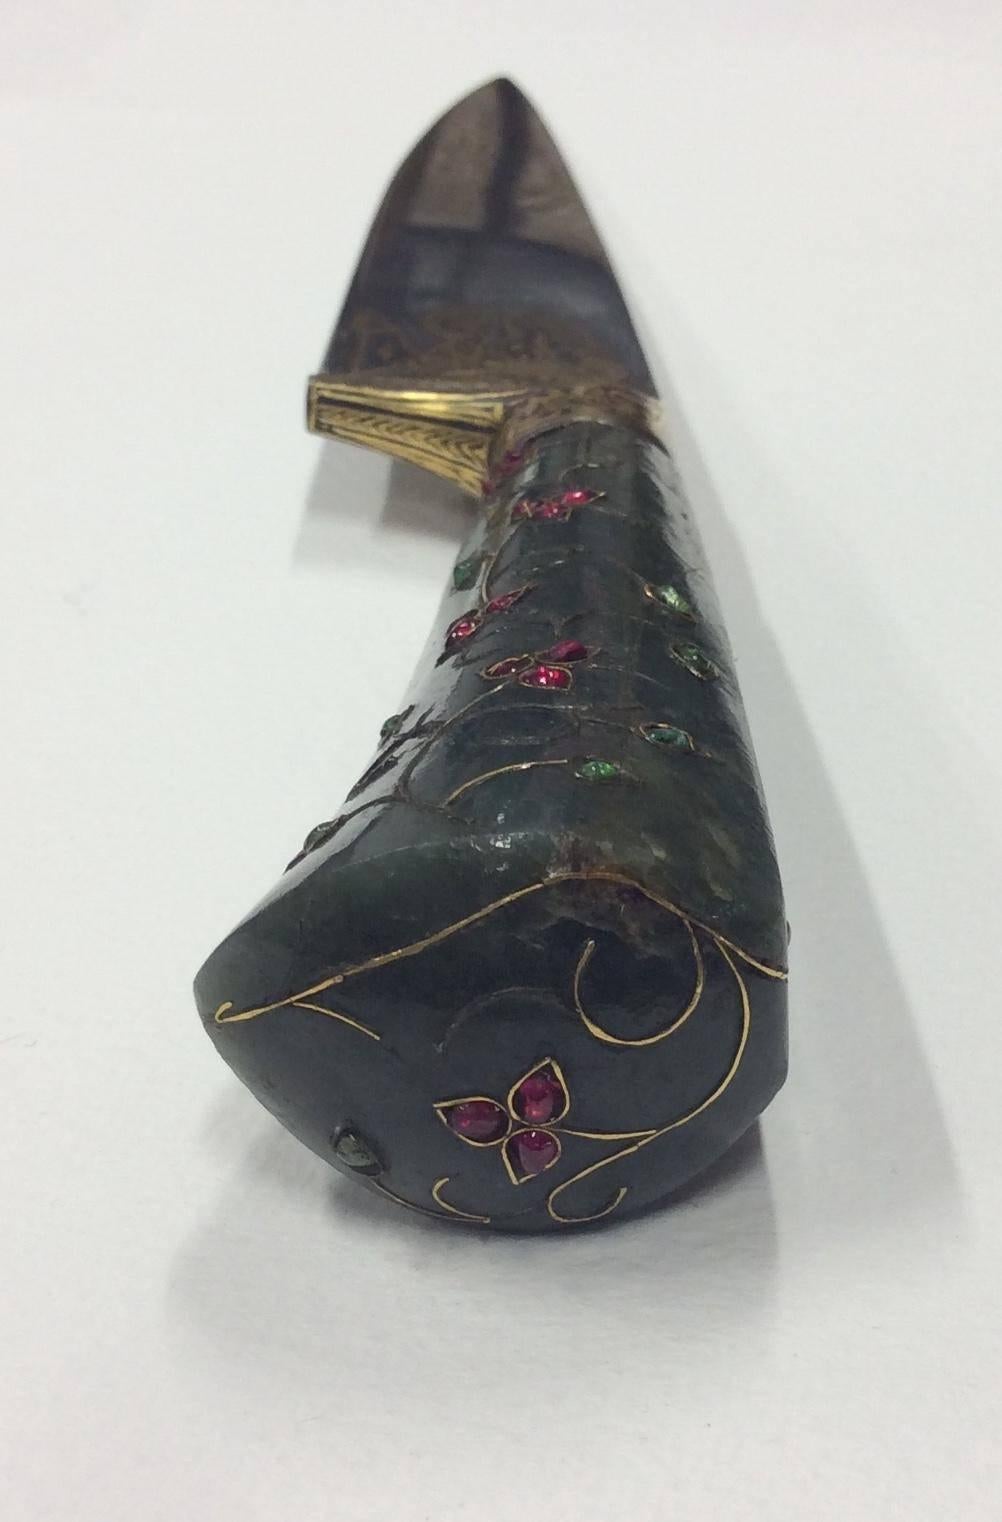 A decorative Indian kard with straight steel blade and jade hilt featuring gold lines set with stone cabochons in light green and cranberry that form foliate designs. The hilt style is reminiscent of Mughal kards of the 17th century which featured